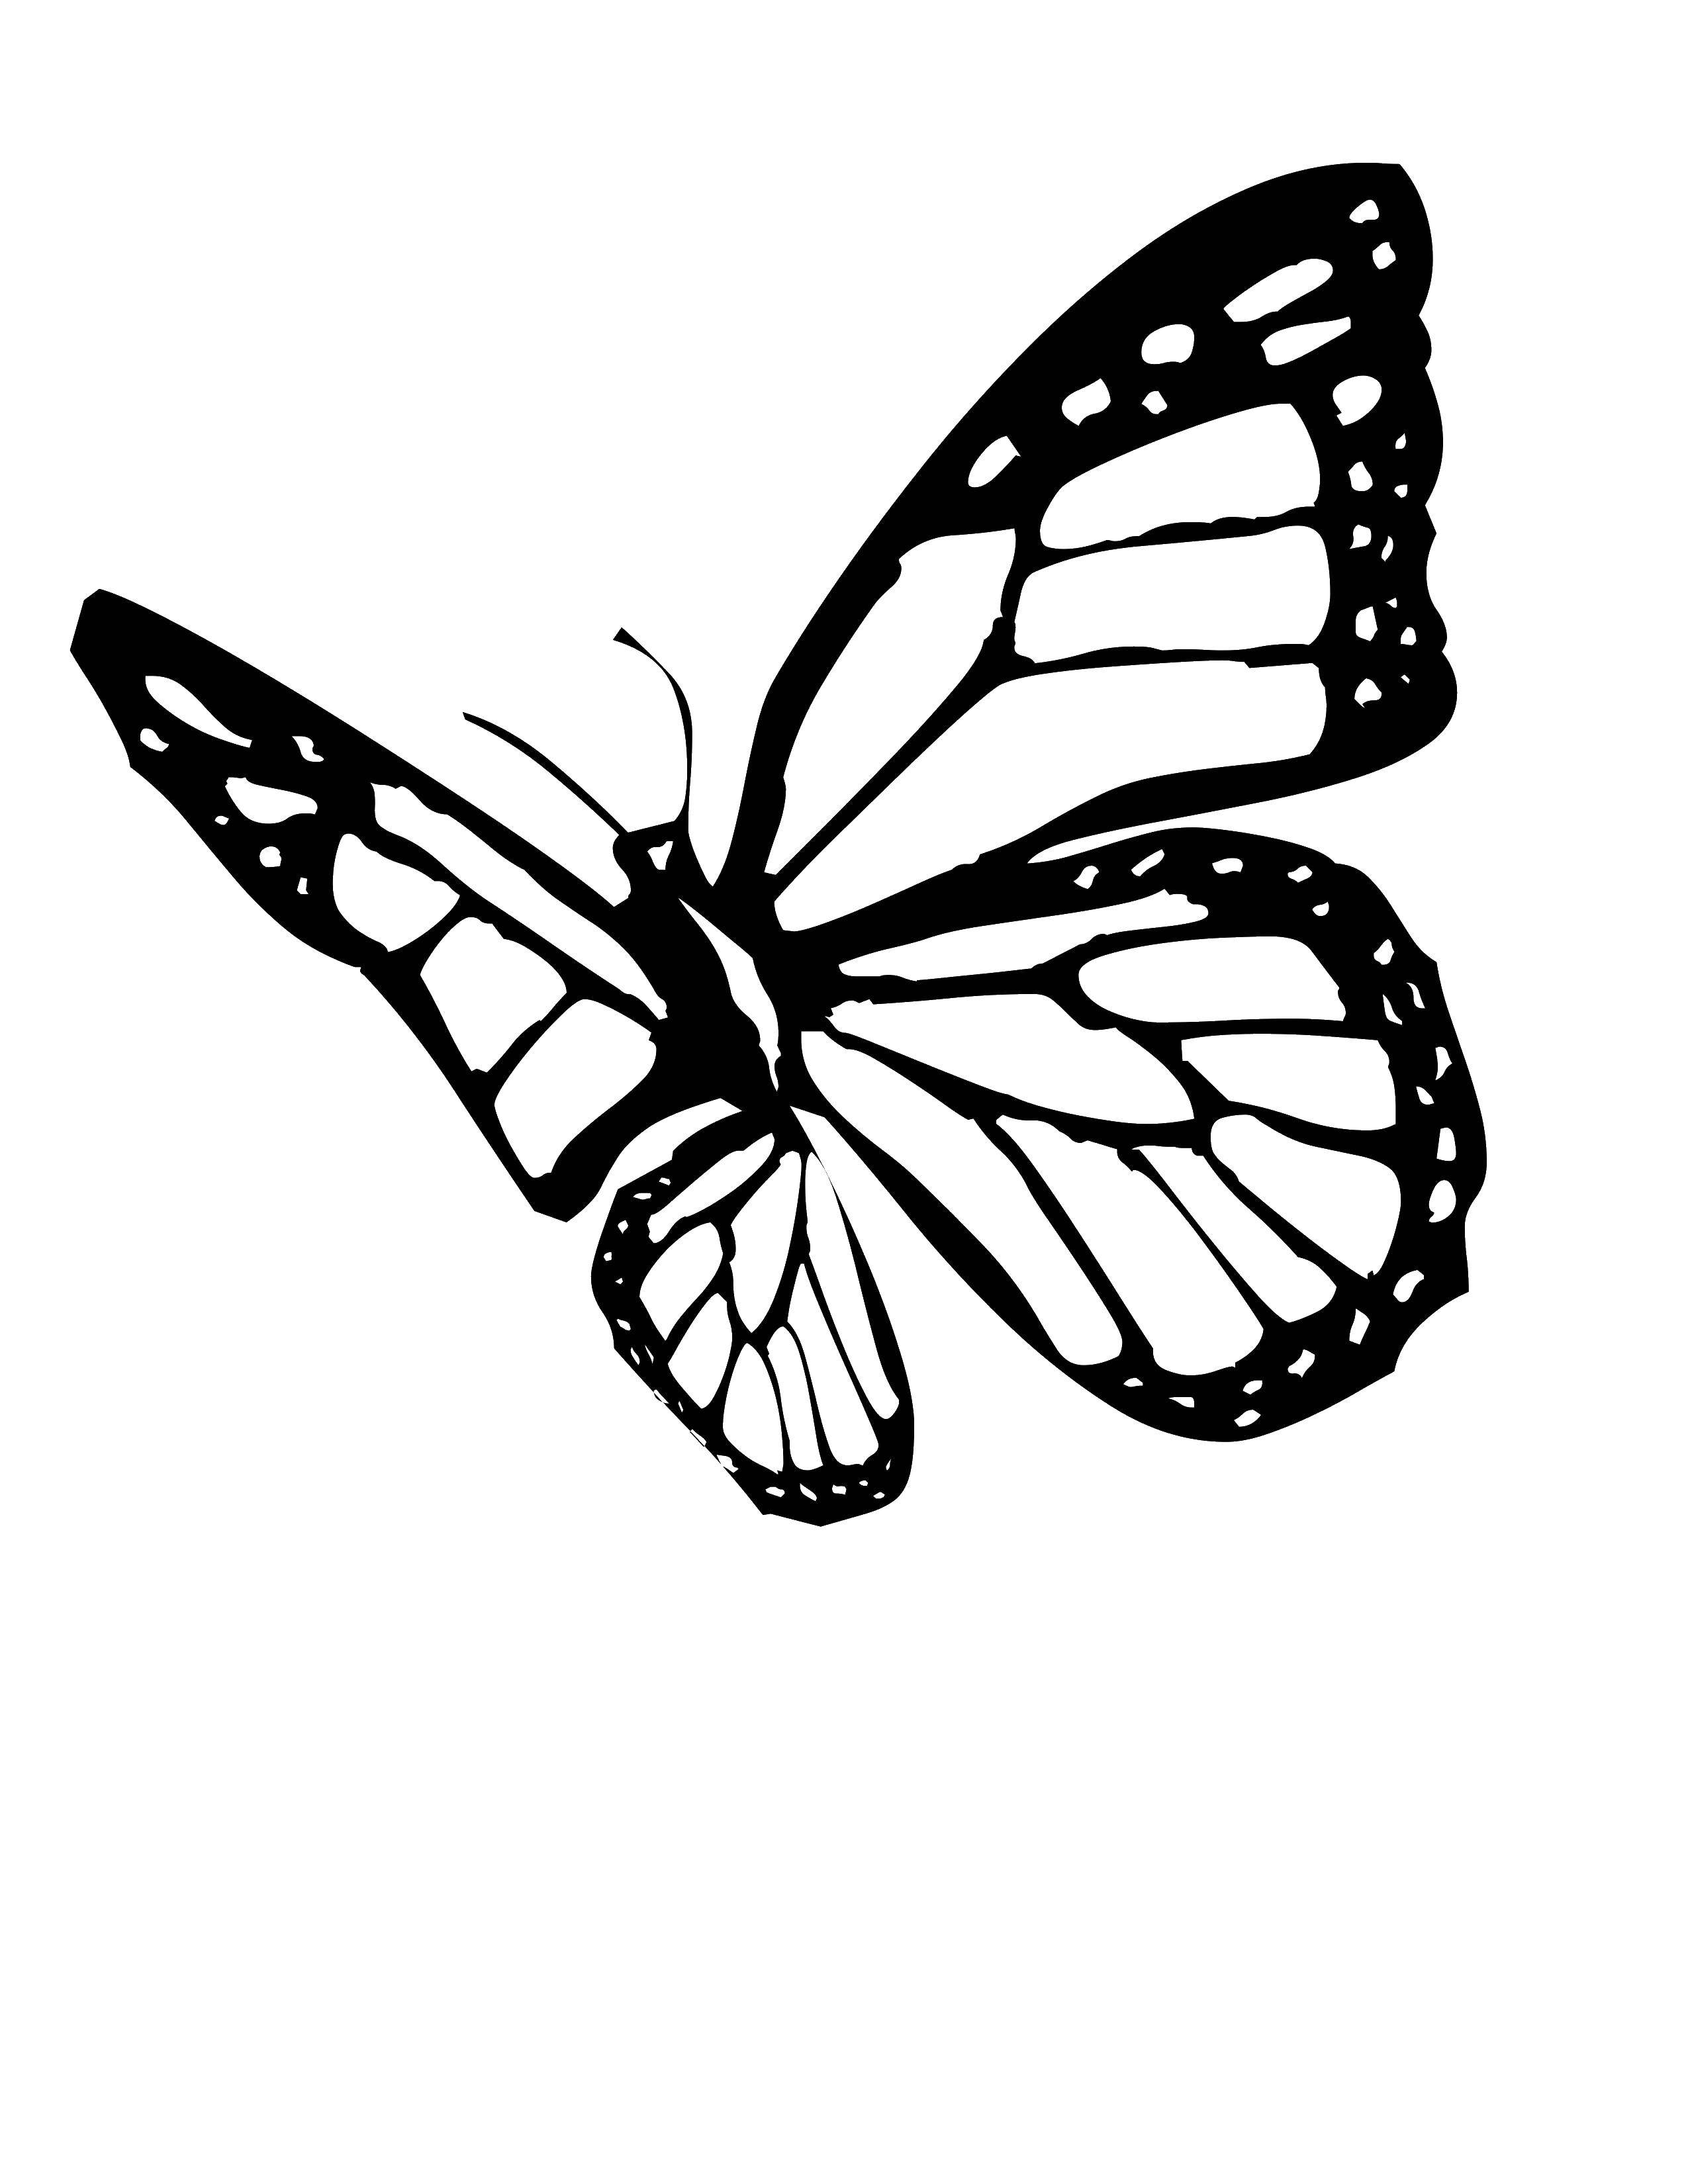 Coloring Butterfly. Category butterflies. Tags:  insects, butterflies.